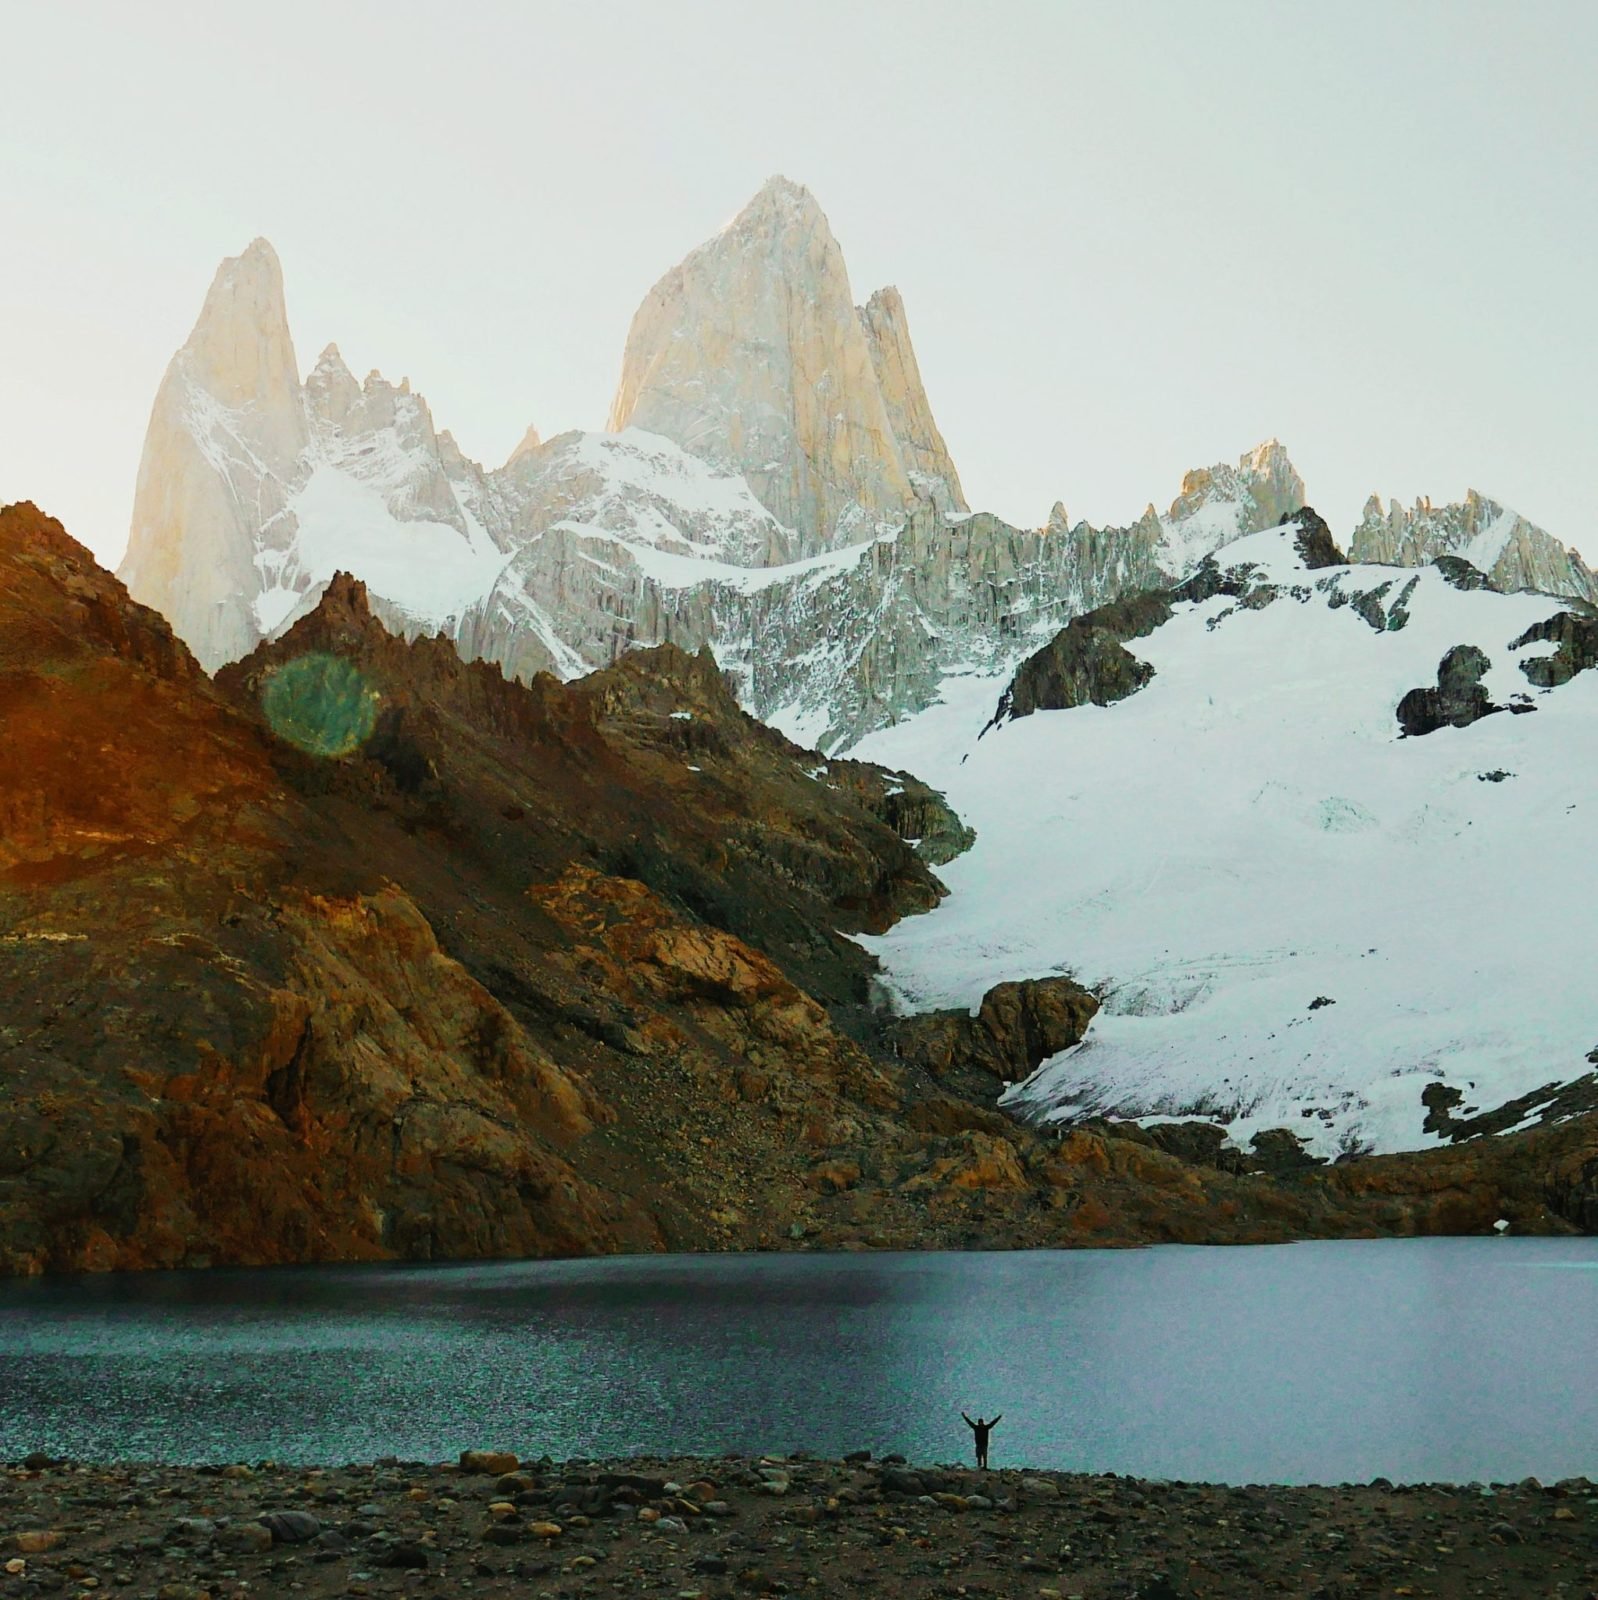 An incredibly humbling picture of fitz roy mountain on a multi-day trek in the region